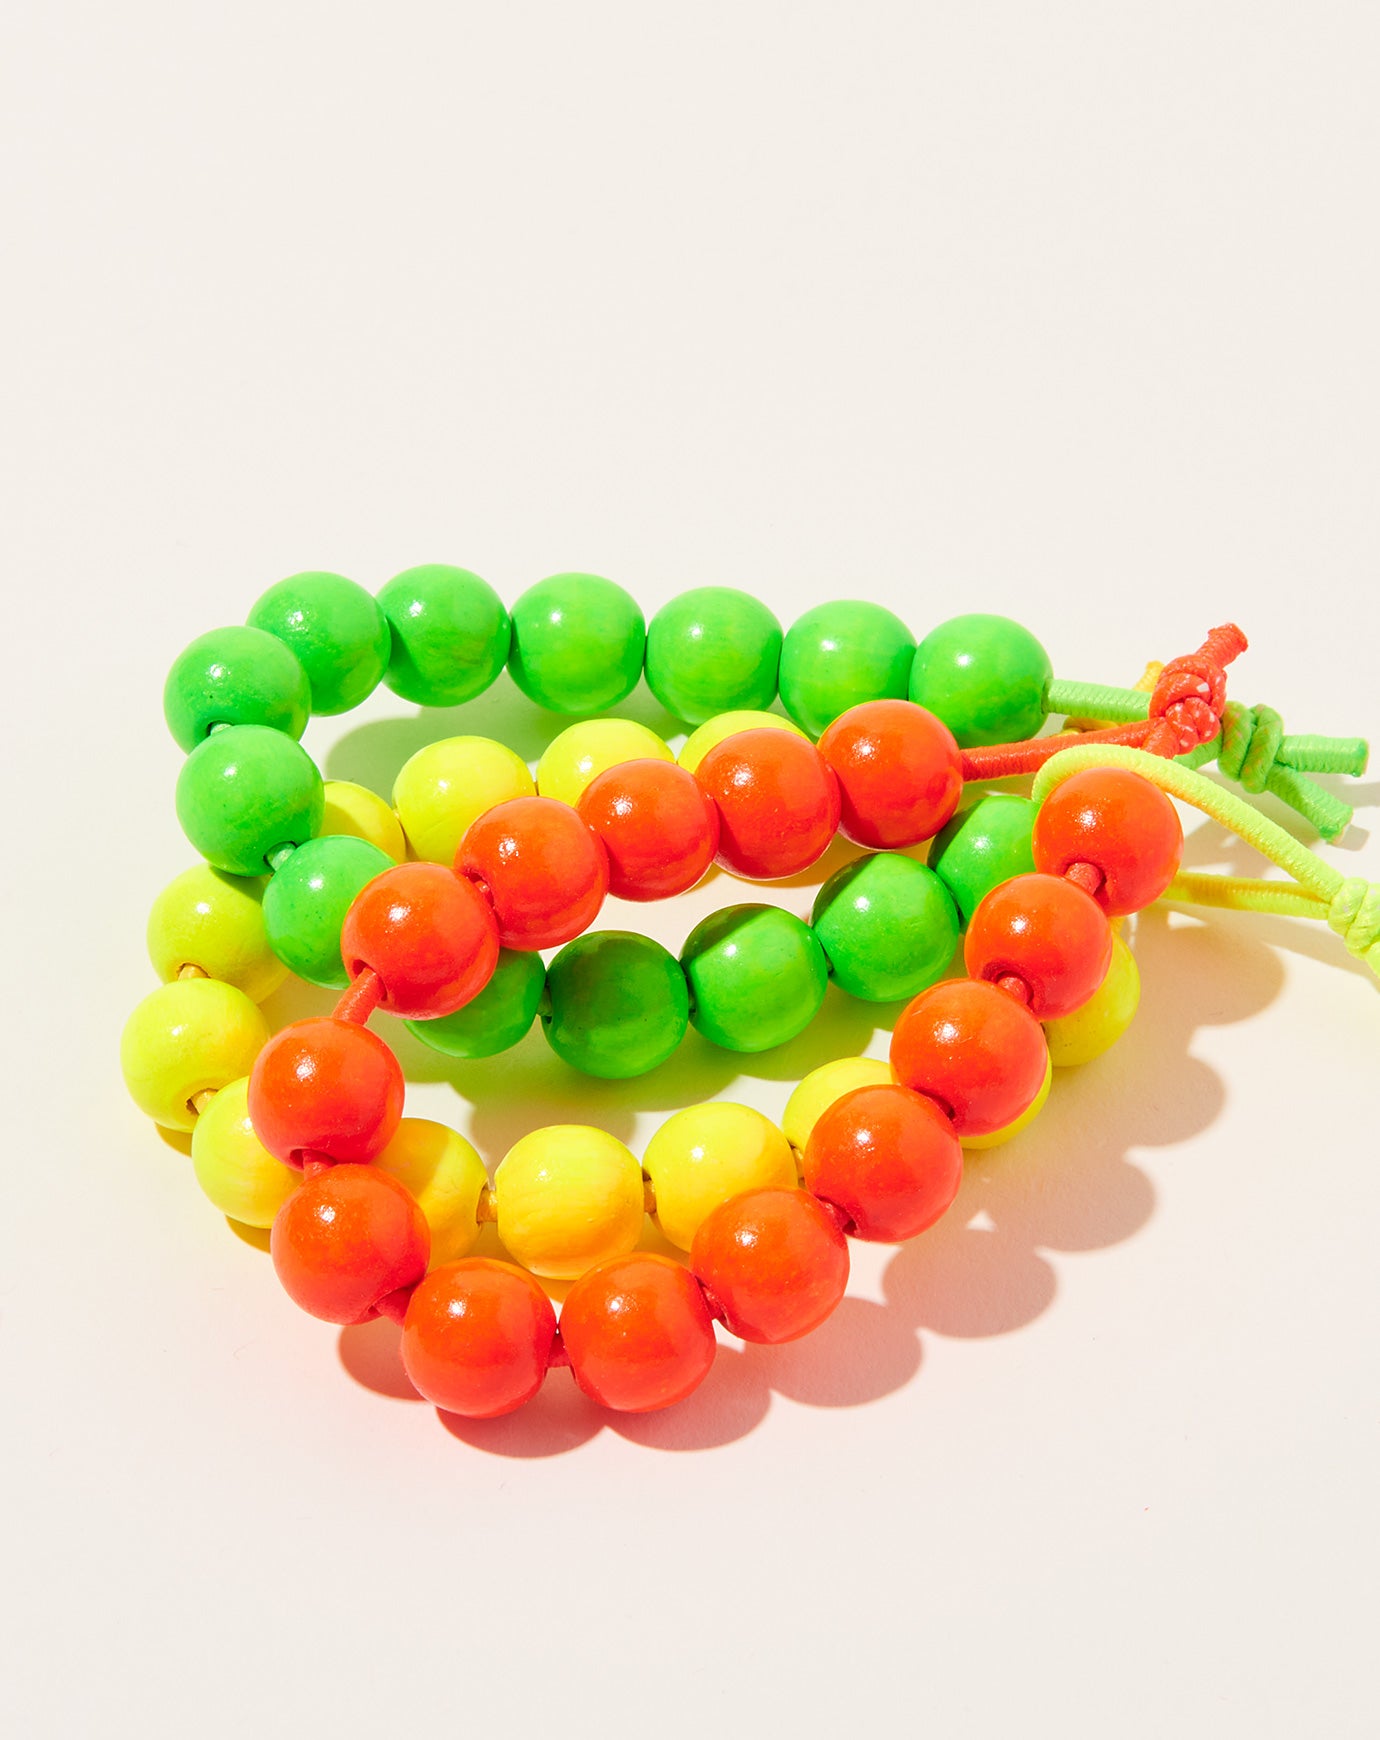 Ina Seifart Hair Tie Set in Neon Mix